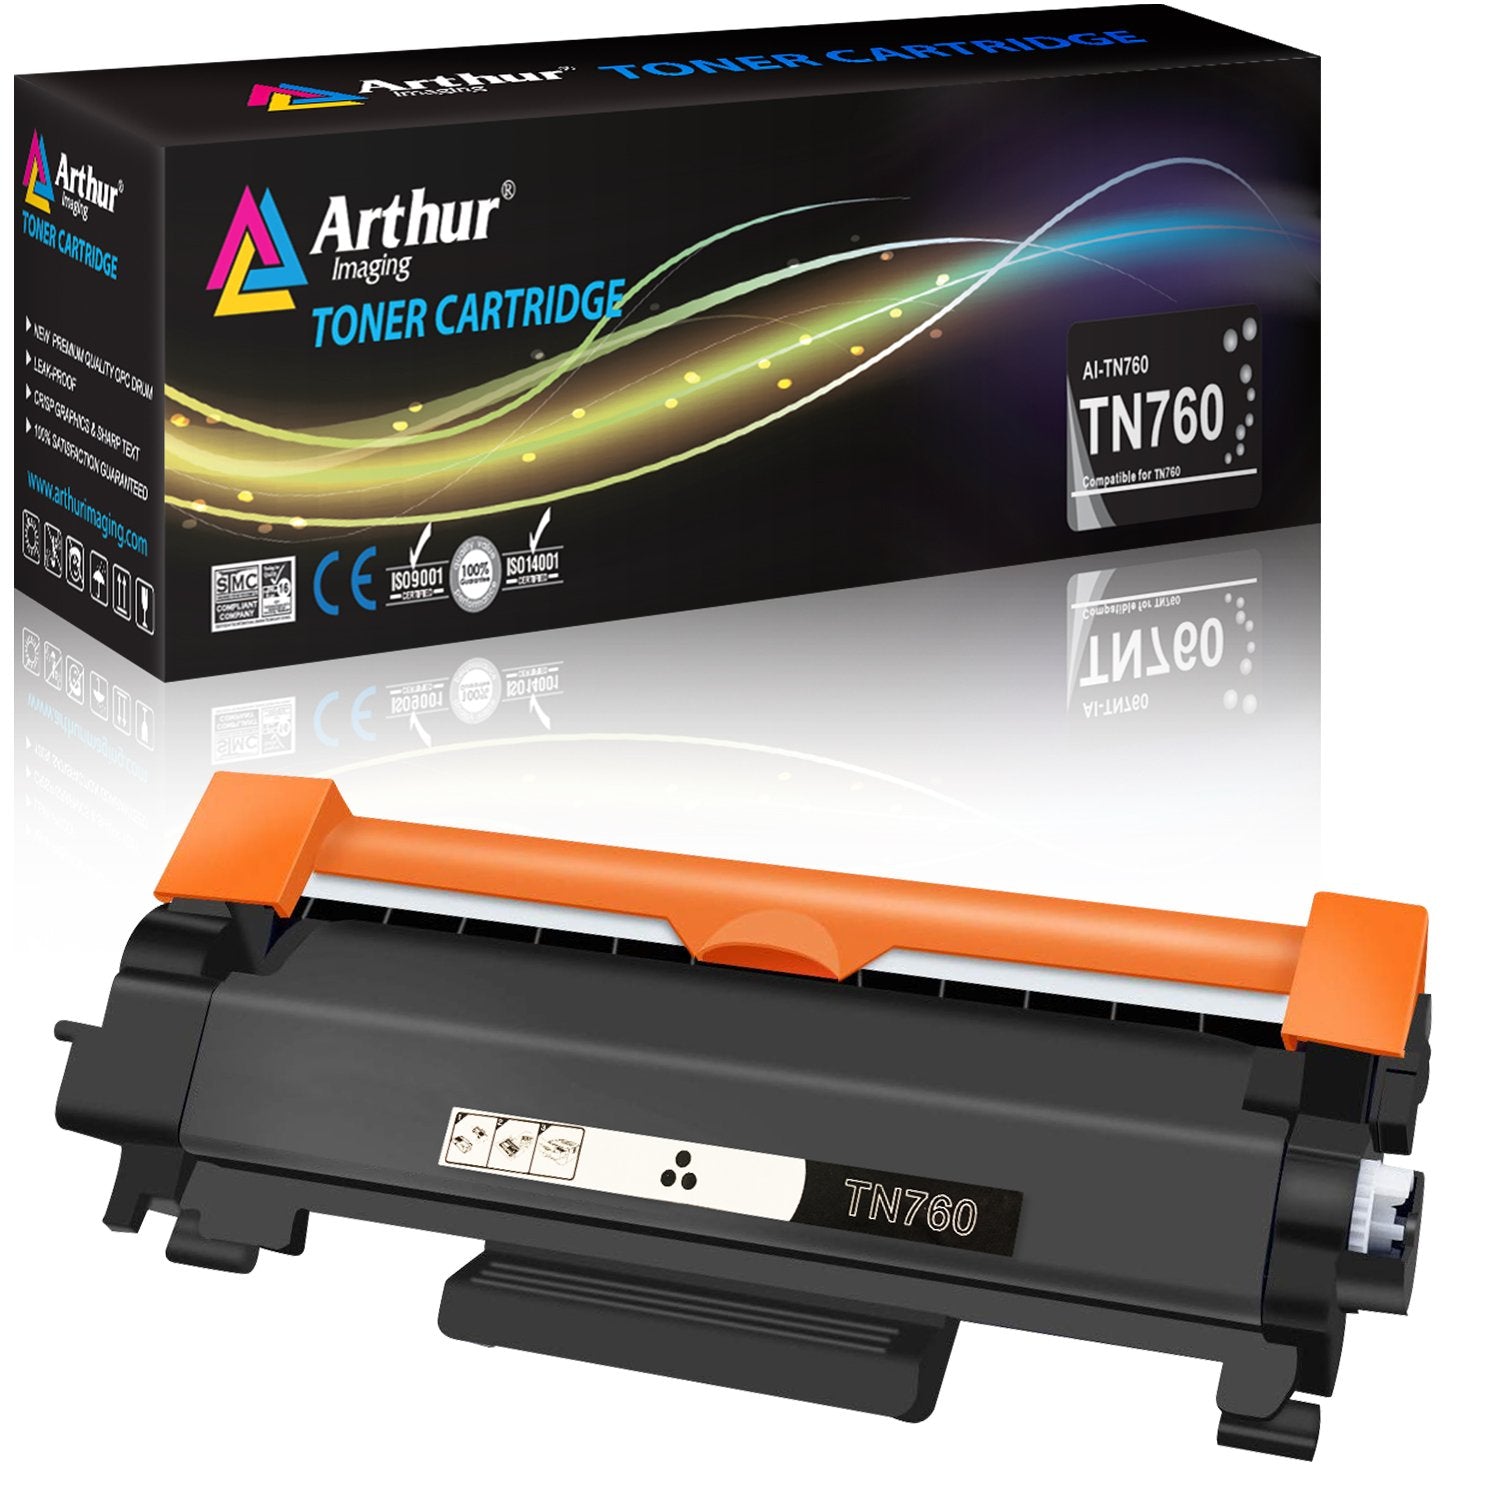 Brother MFC-L2710DW All-in-One Monochrome Printer with TN760 High Yield  Black Toner Kit